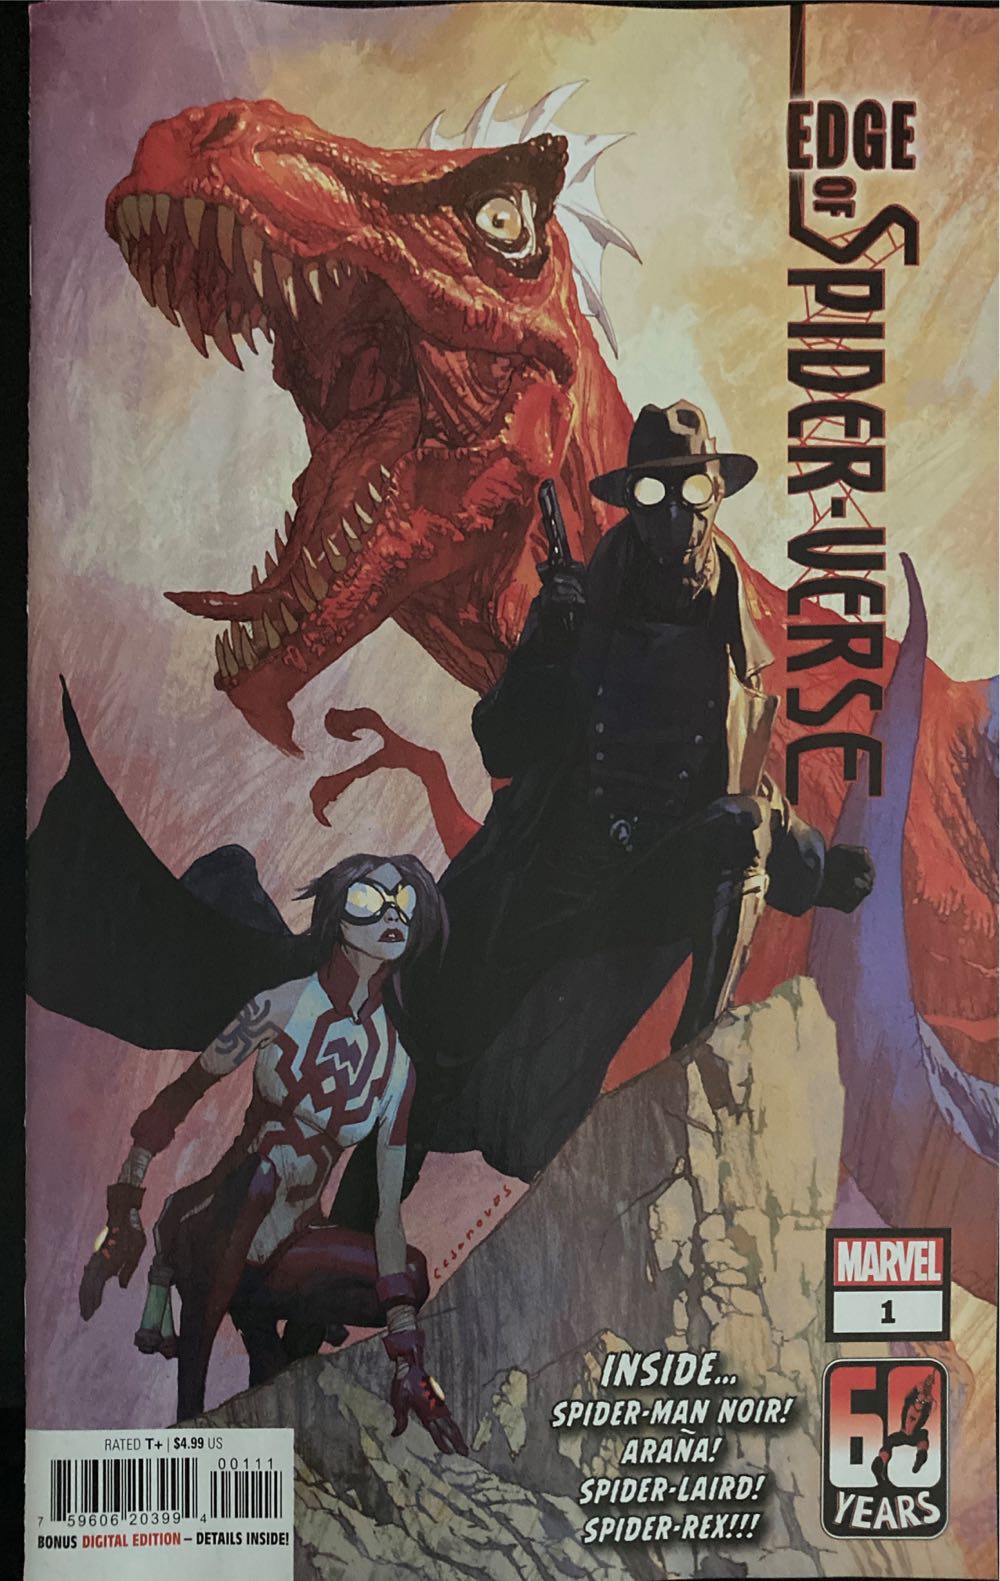 Edge Of Spider-Verse - Marvel (1 - Oct 2022) comic book collectible [Barcode 75960620399400111] - Main Image 1